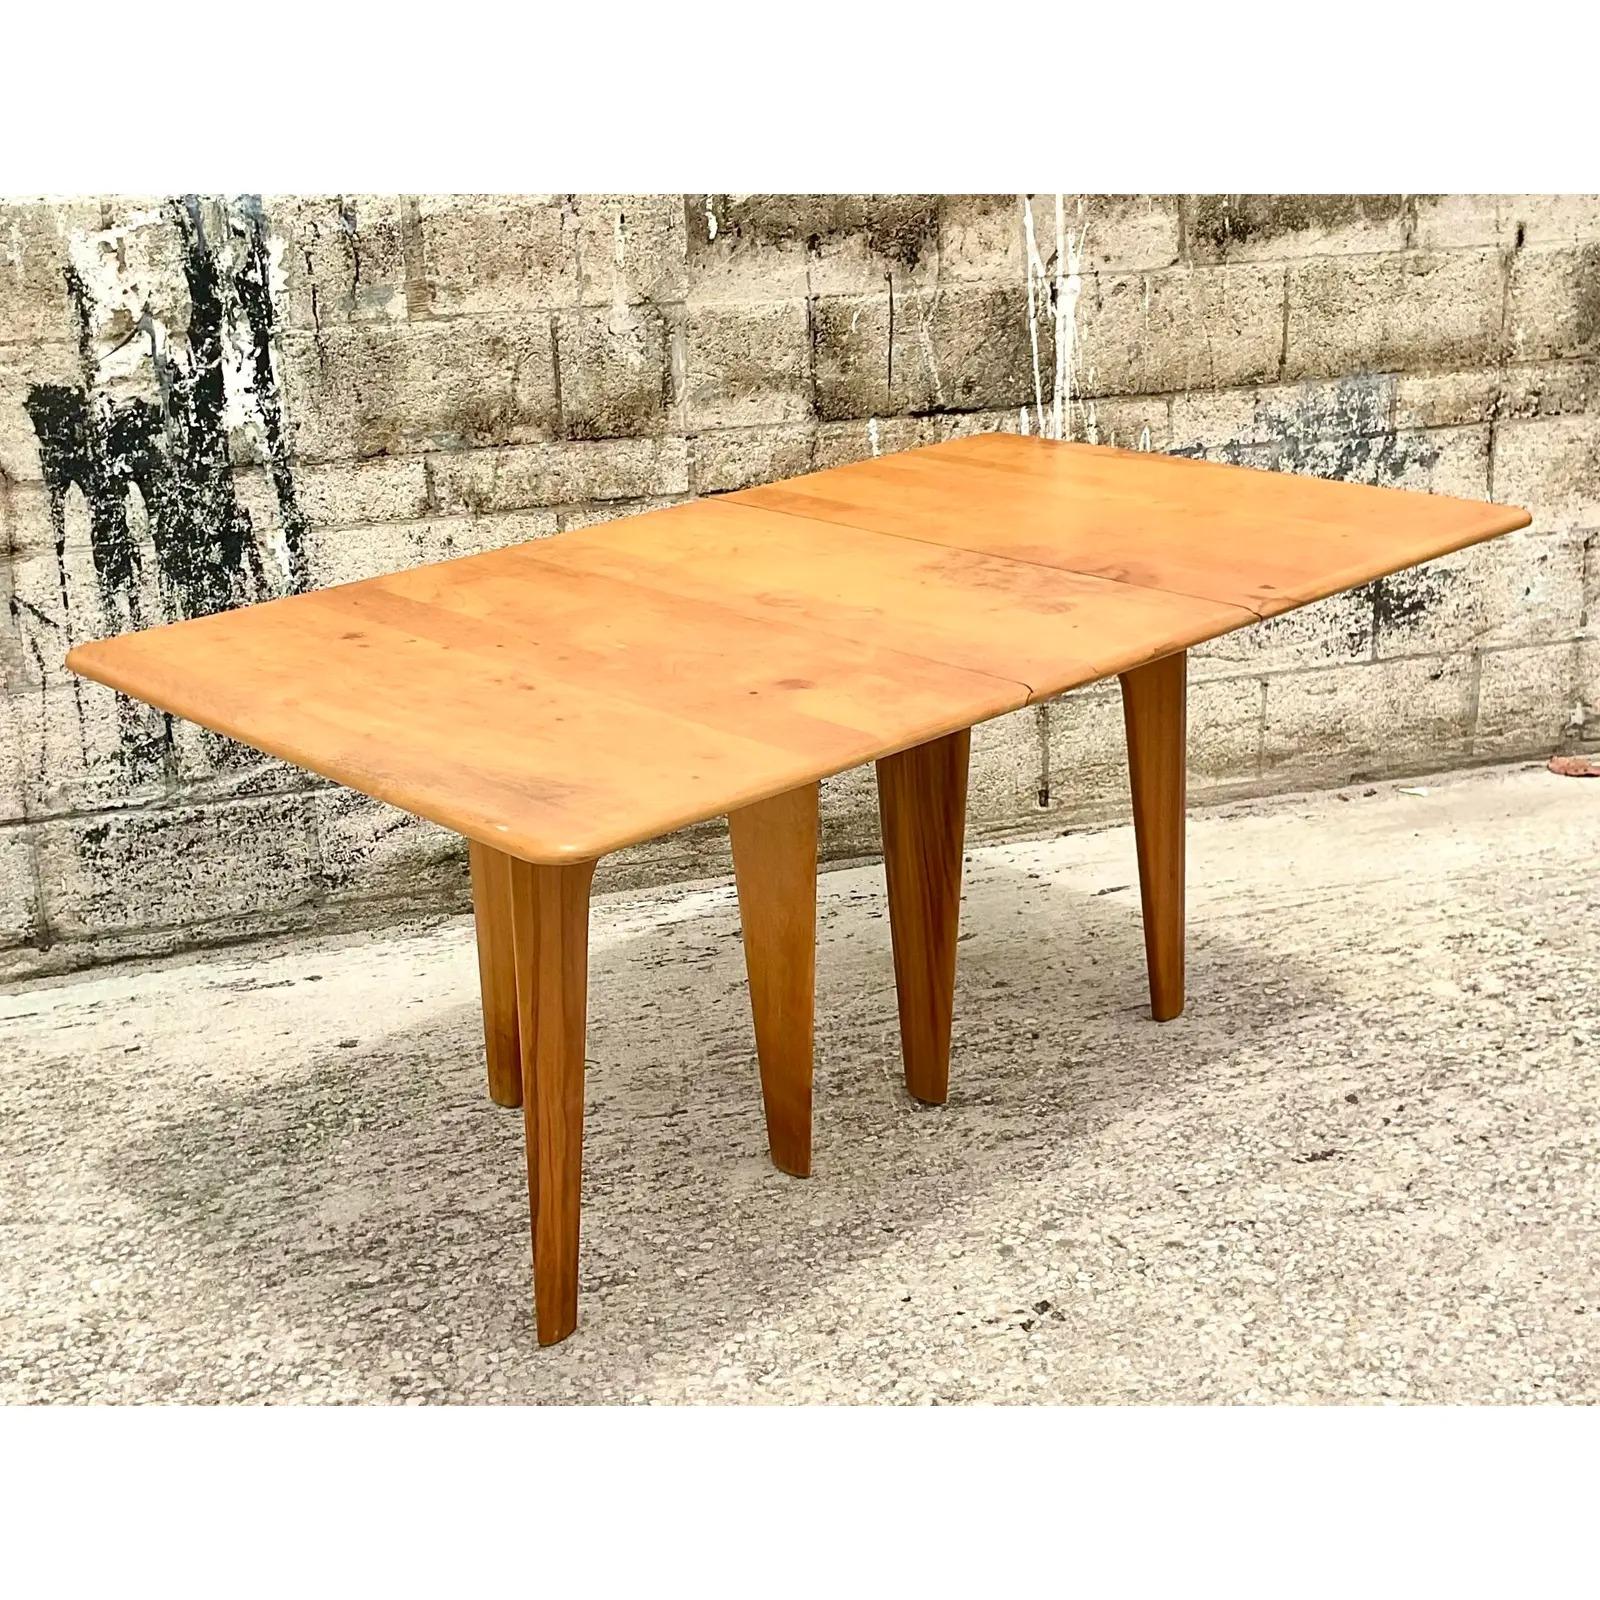 Fantastic vintage MCM dining table. Made by the iconic Heywood Wakefield. Beautiful drop leaf design makes this perfect for city apartments. All the joys of a large dining table with the ability to drop the sides and slip into a small area. Looks